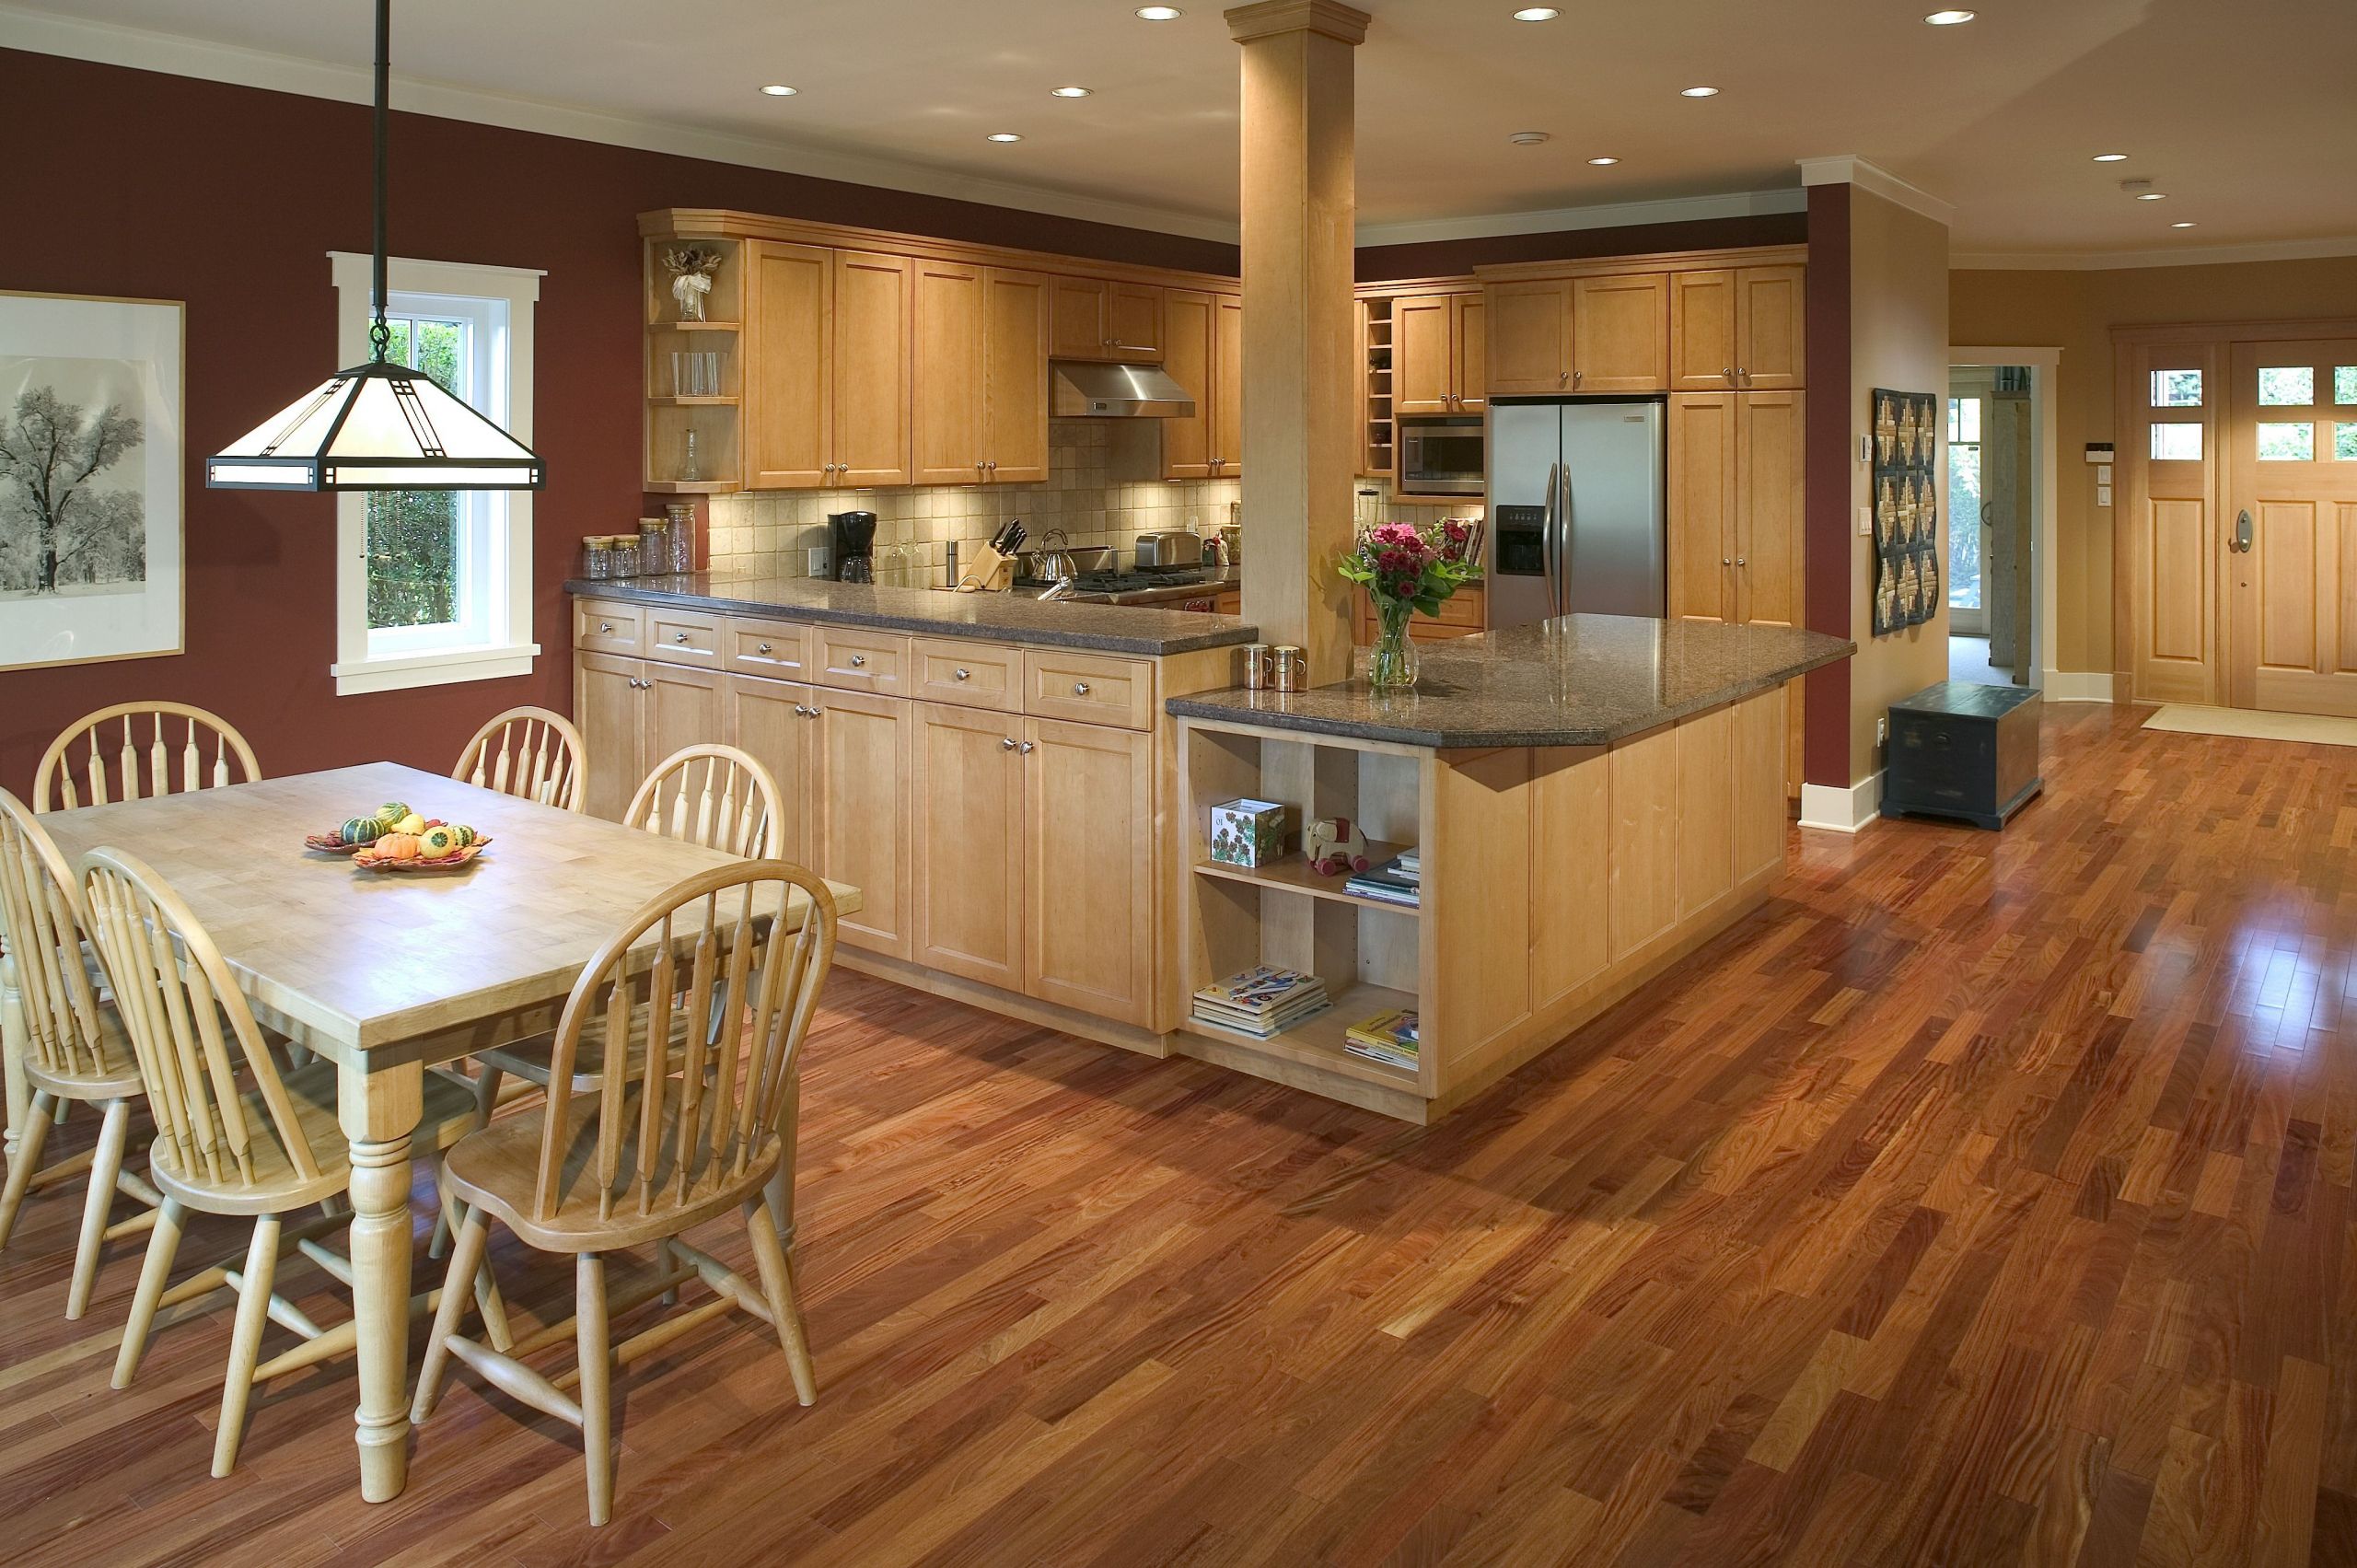 Kitchen Cabinet Remodel Cost
 5 Questions to Ask Before All Kitchen Remodels